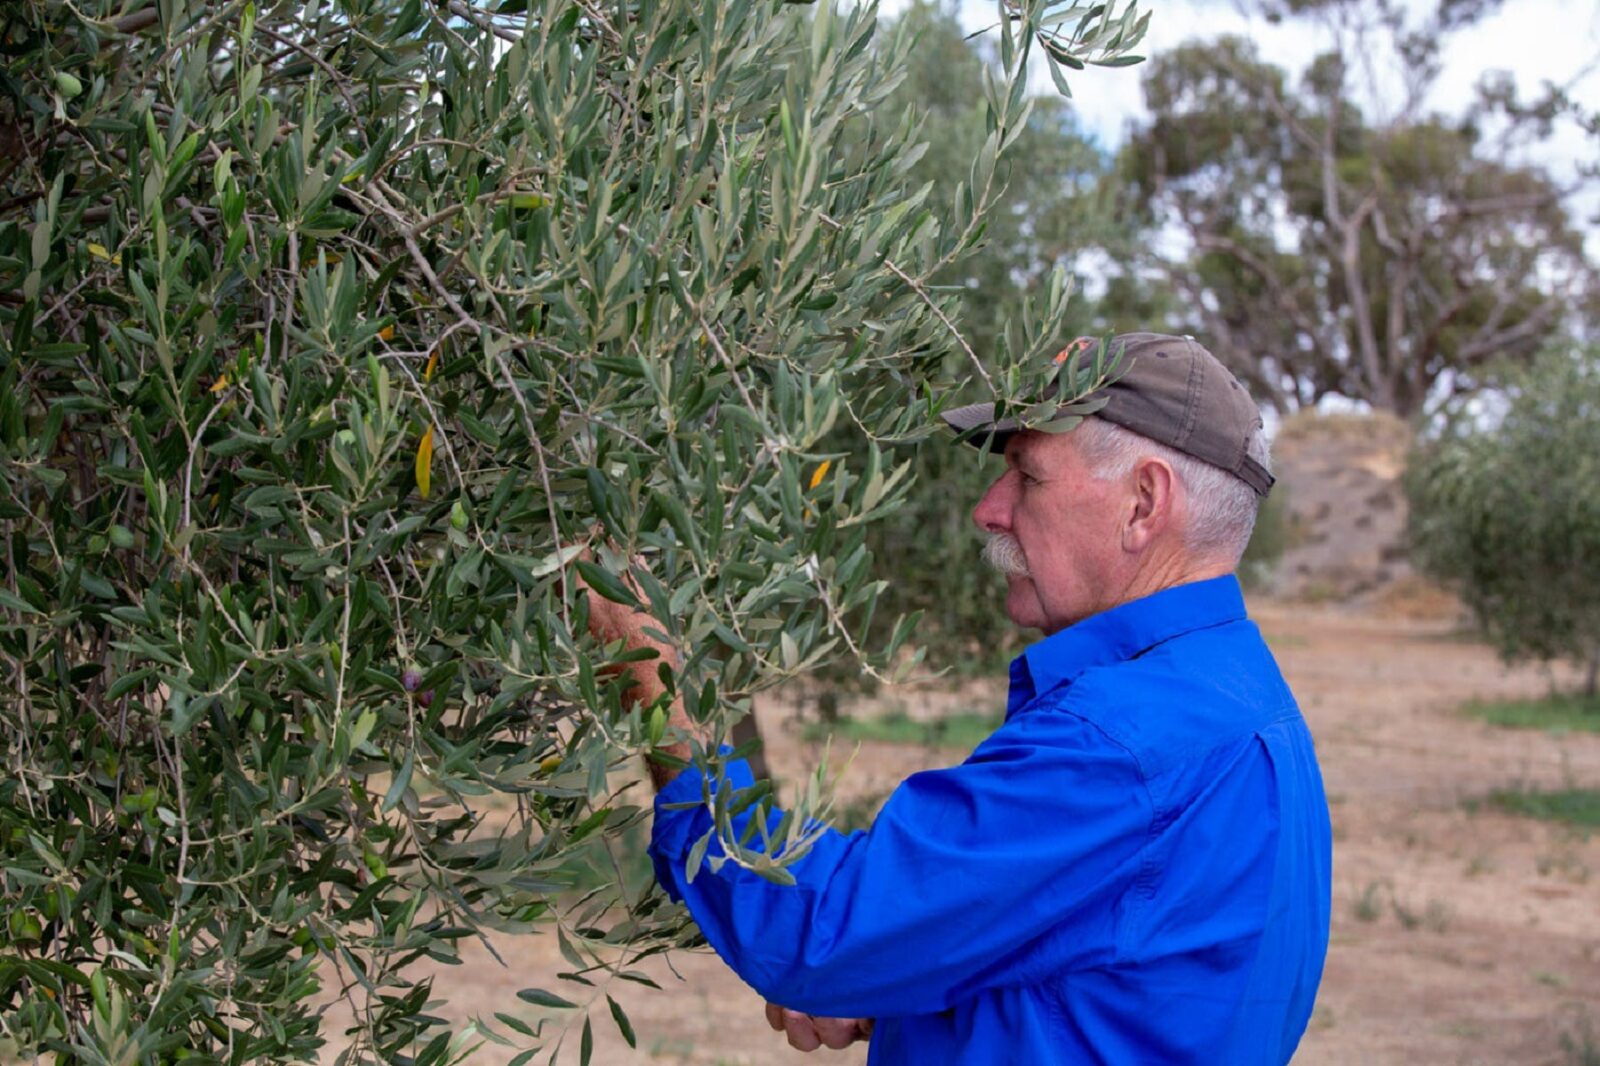 A man picking olives from an olive tree